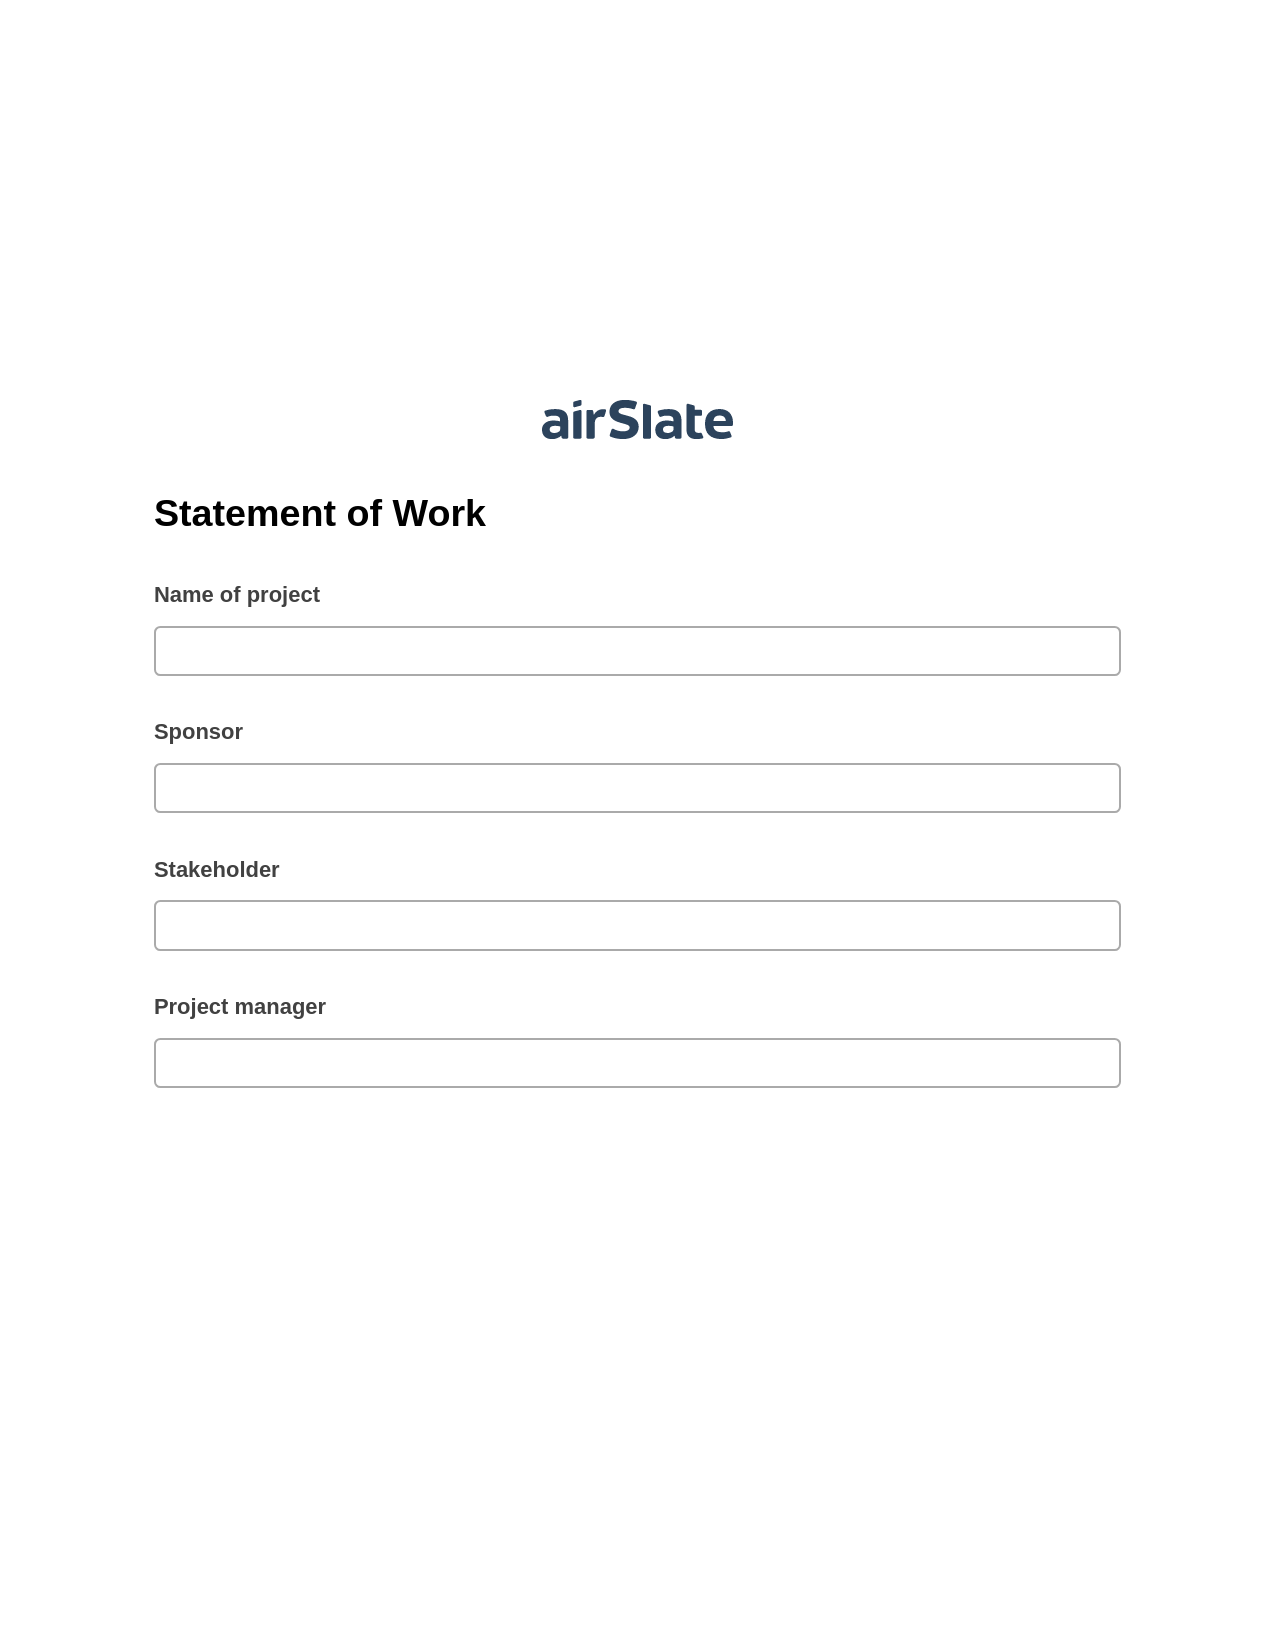 Multirole Statement of Work Pre-fill Dropdowns from Office 365 Excel Bot, Send Slate to MS Dynamics 365 Contact DEPRECATED, Webhook Postfinish Bot